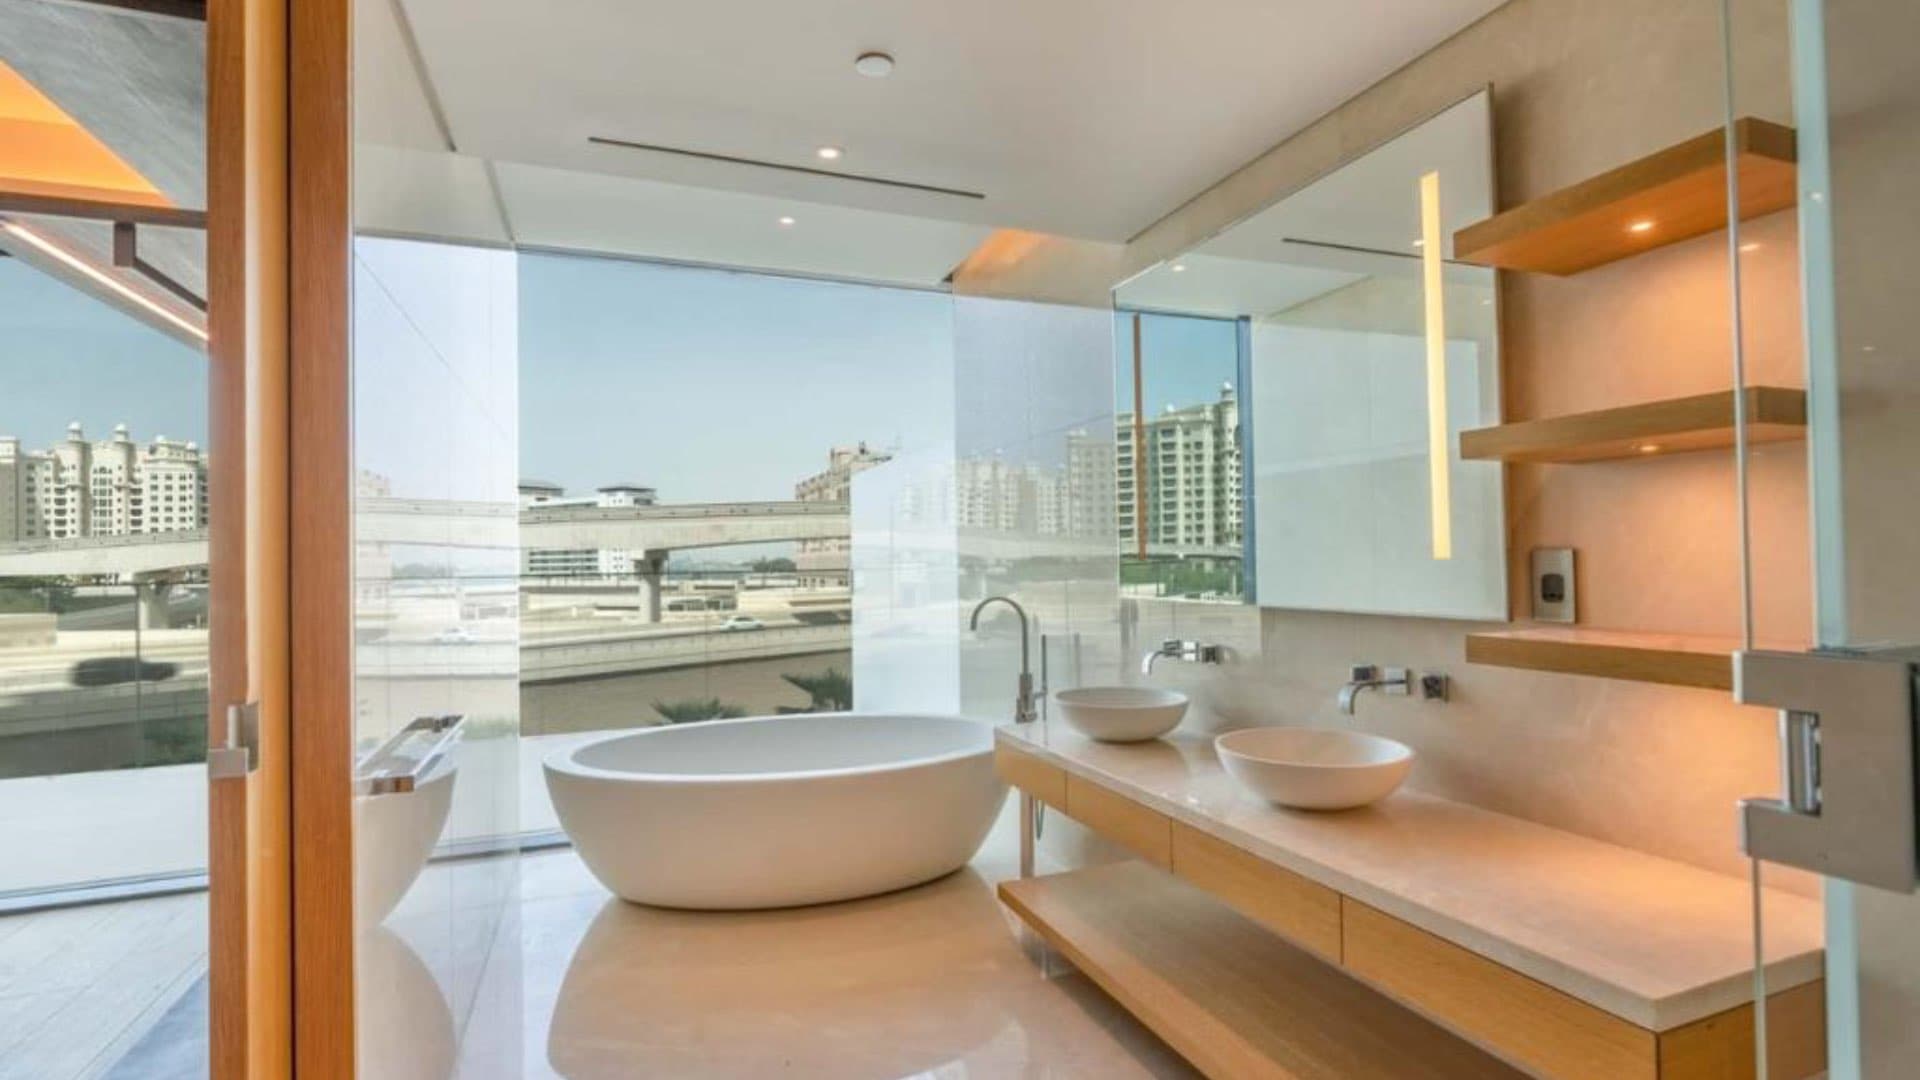 3 Bedroom Apartment For Sale One At Palm Jumeirah Lp10383 10146ce3c67be300.jpeg